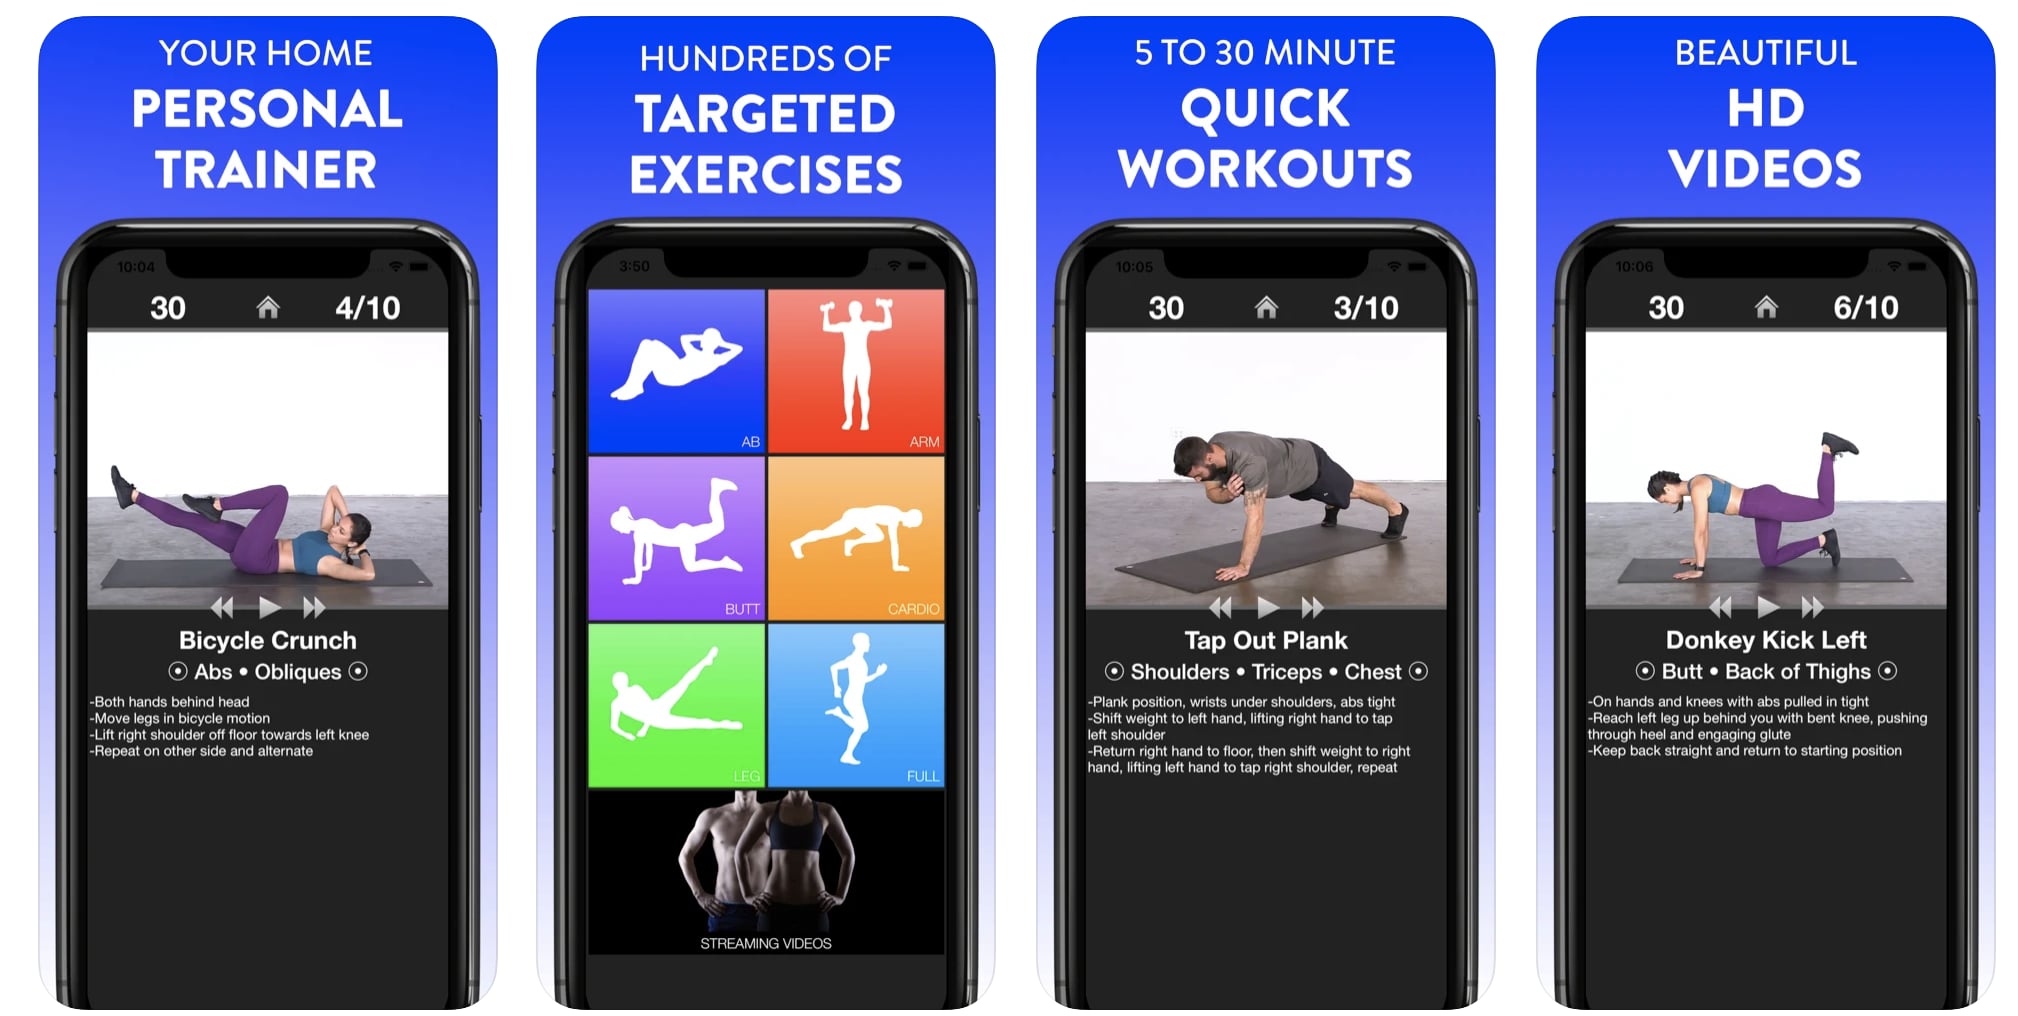 Daily Workouts Home Trainer | 20 Workout Apps to Help Kick-Start Journey | POPSUGAR Fitness Photo 15